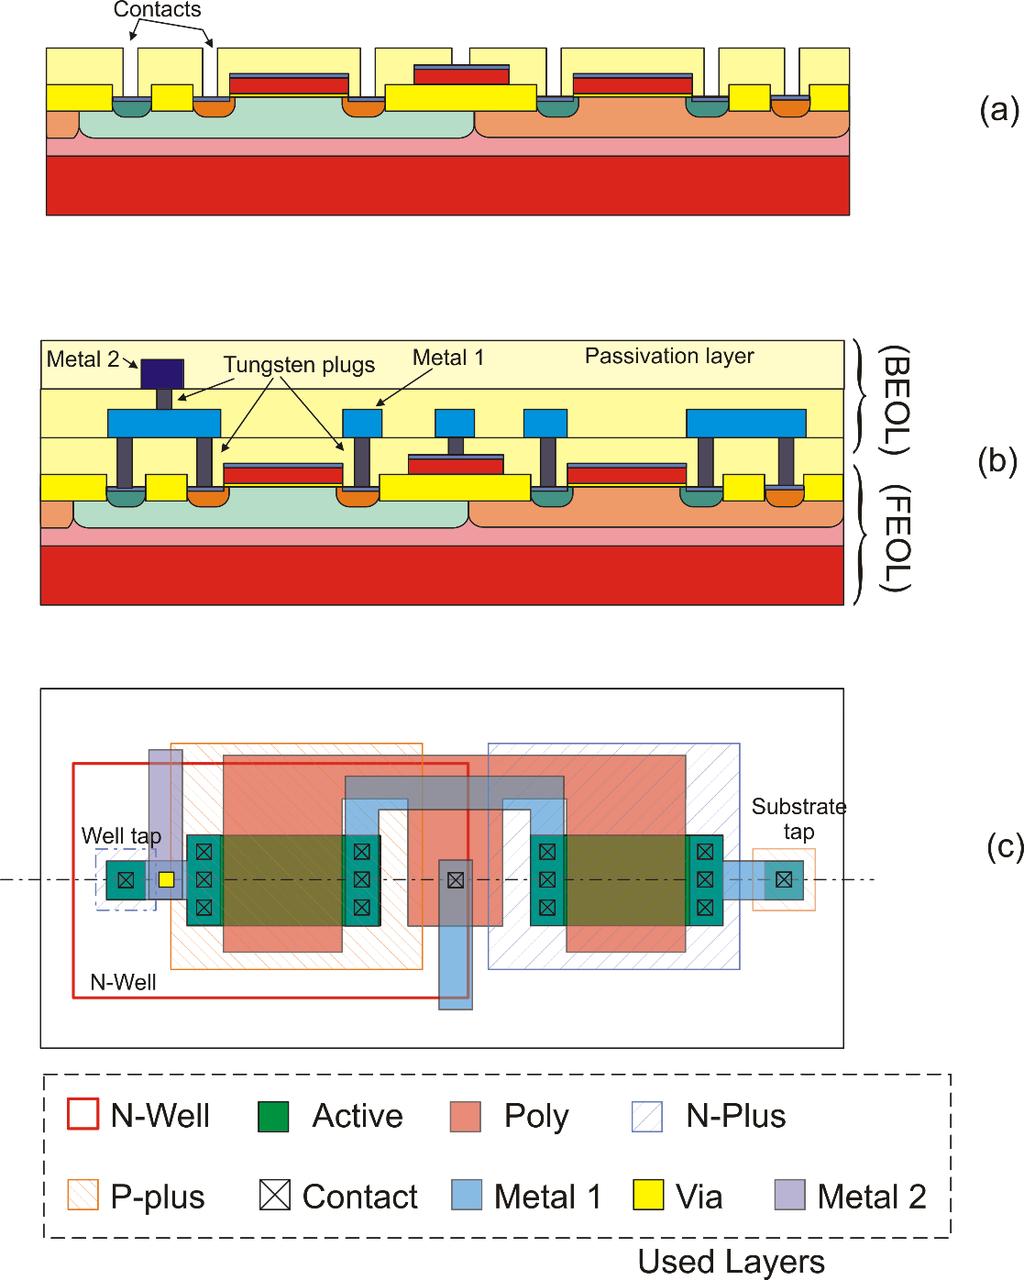 Fig.14. BEOL for a dual metal layer CMOS process. (a) Contact opening through the dielectric layer. (b) Situation after deposition and patterning of the second metal level.